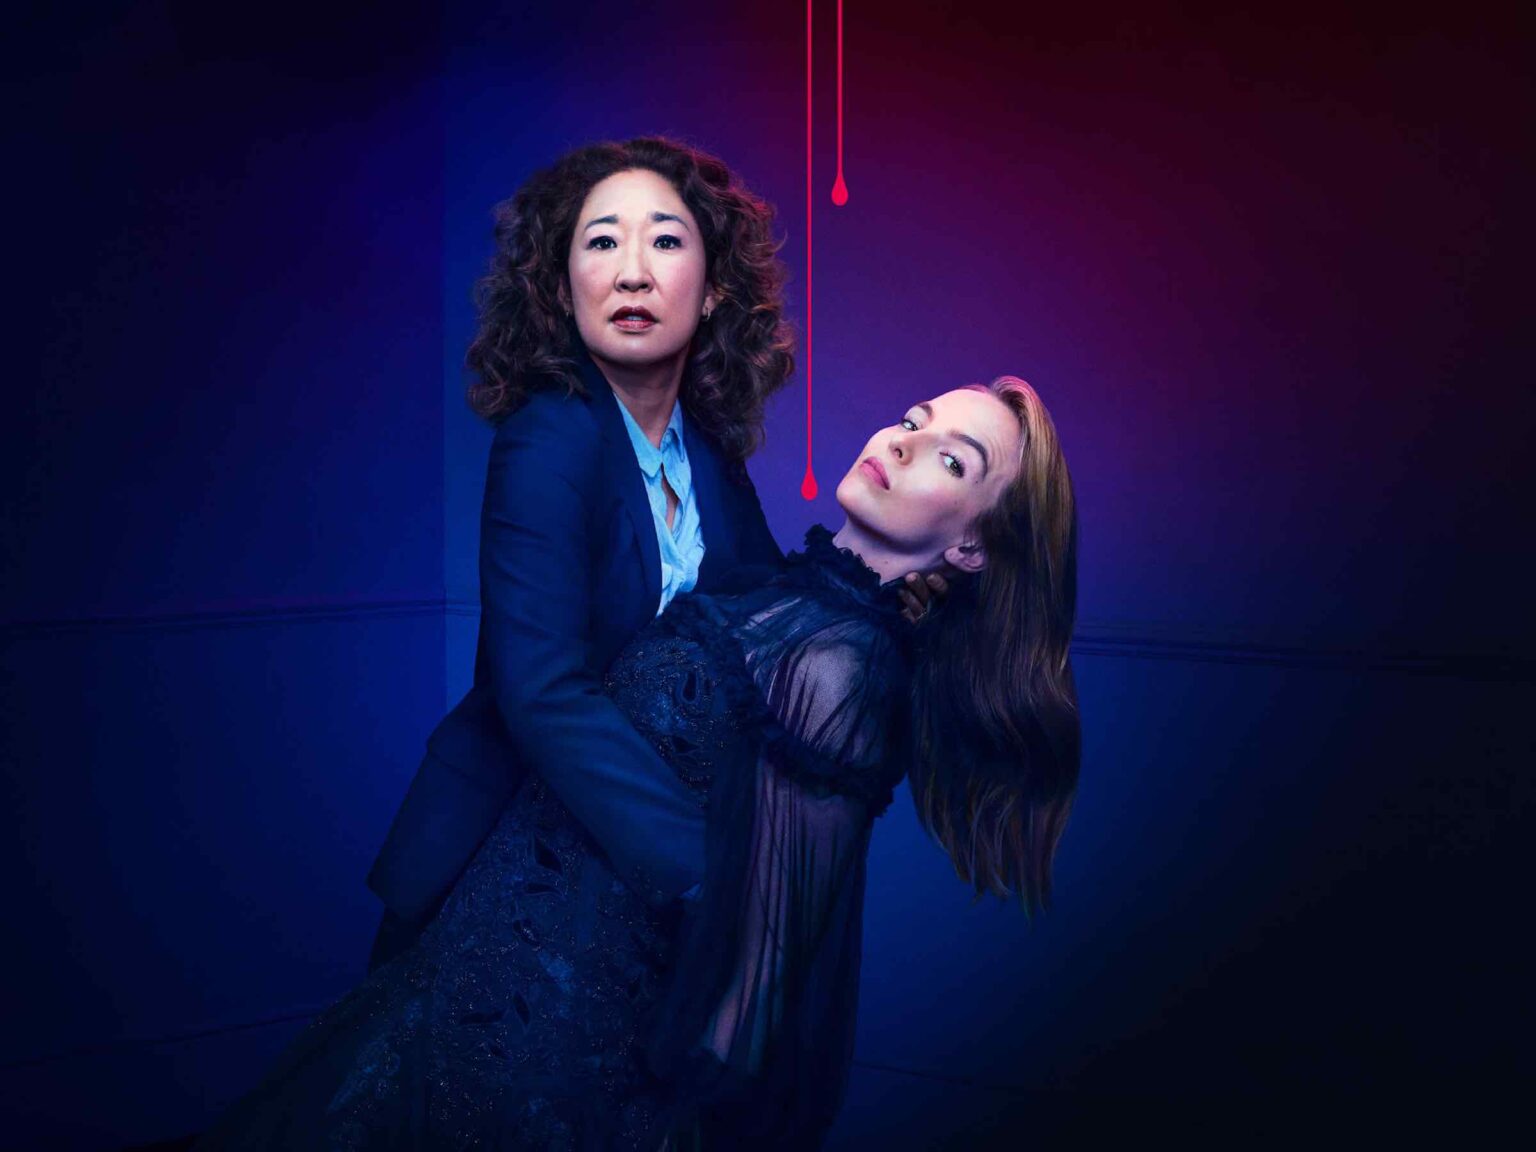 'Killing Eve' is one of those rare perfect shows that it seems like everyone is talking about. Here's our beginners' guide to 'Killing Eve'.